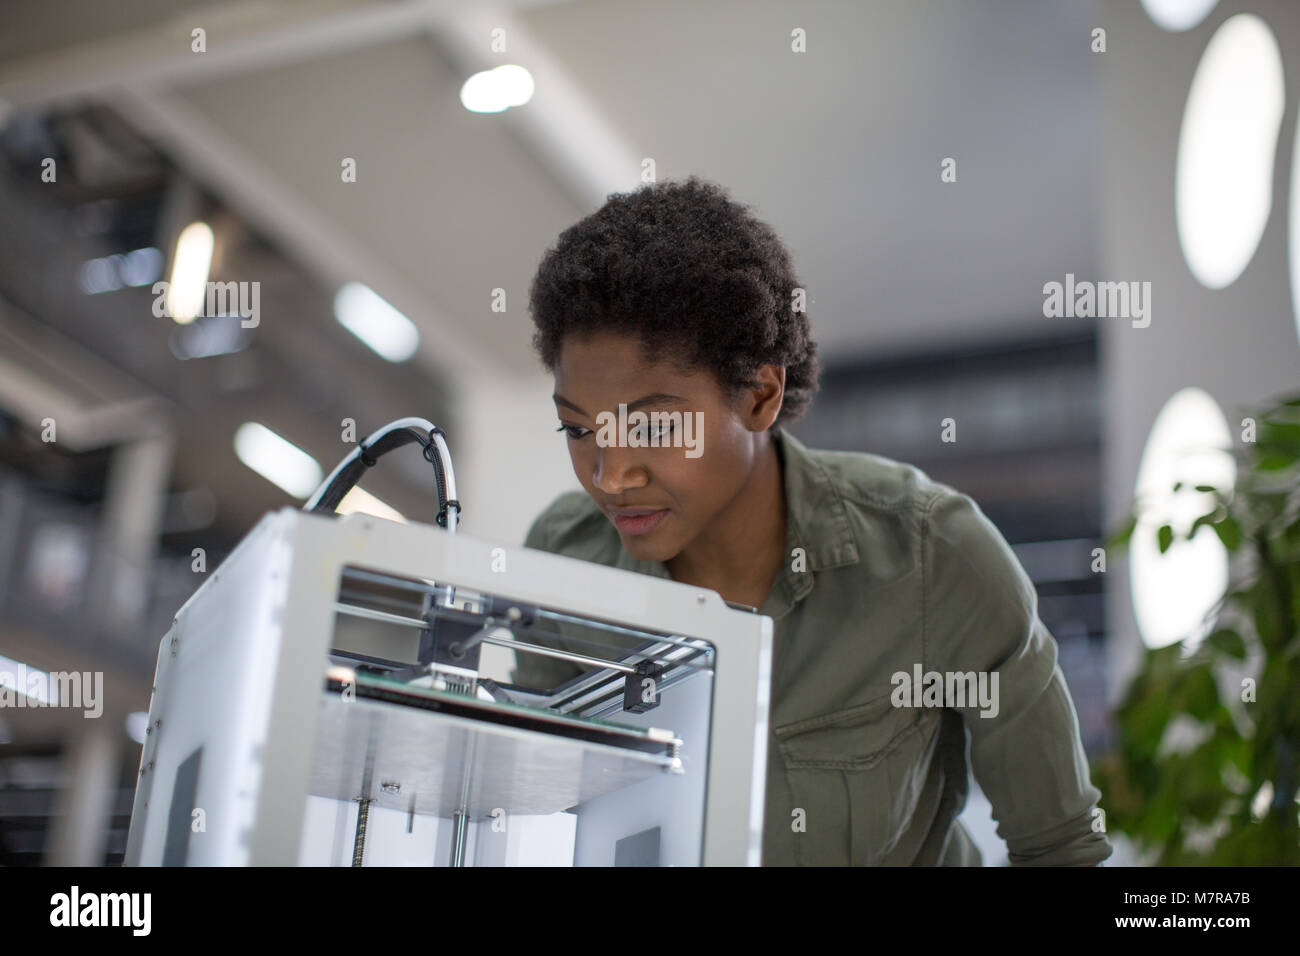 Female looking at 3D printer Stock Photo